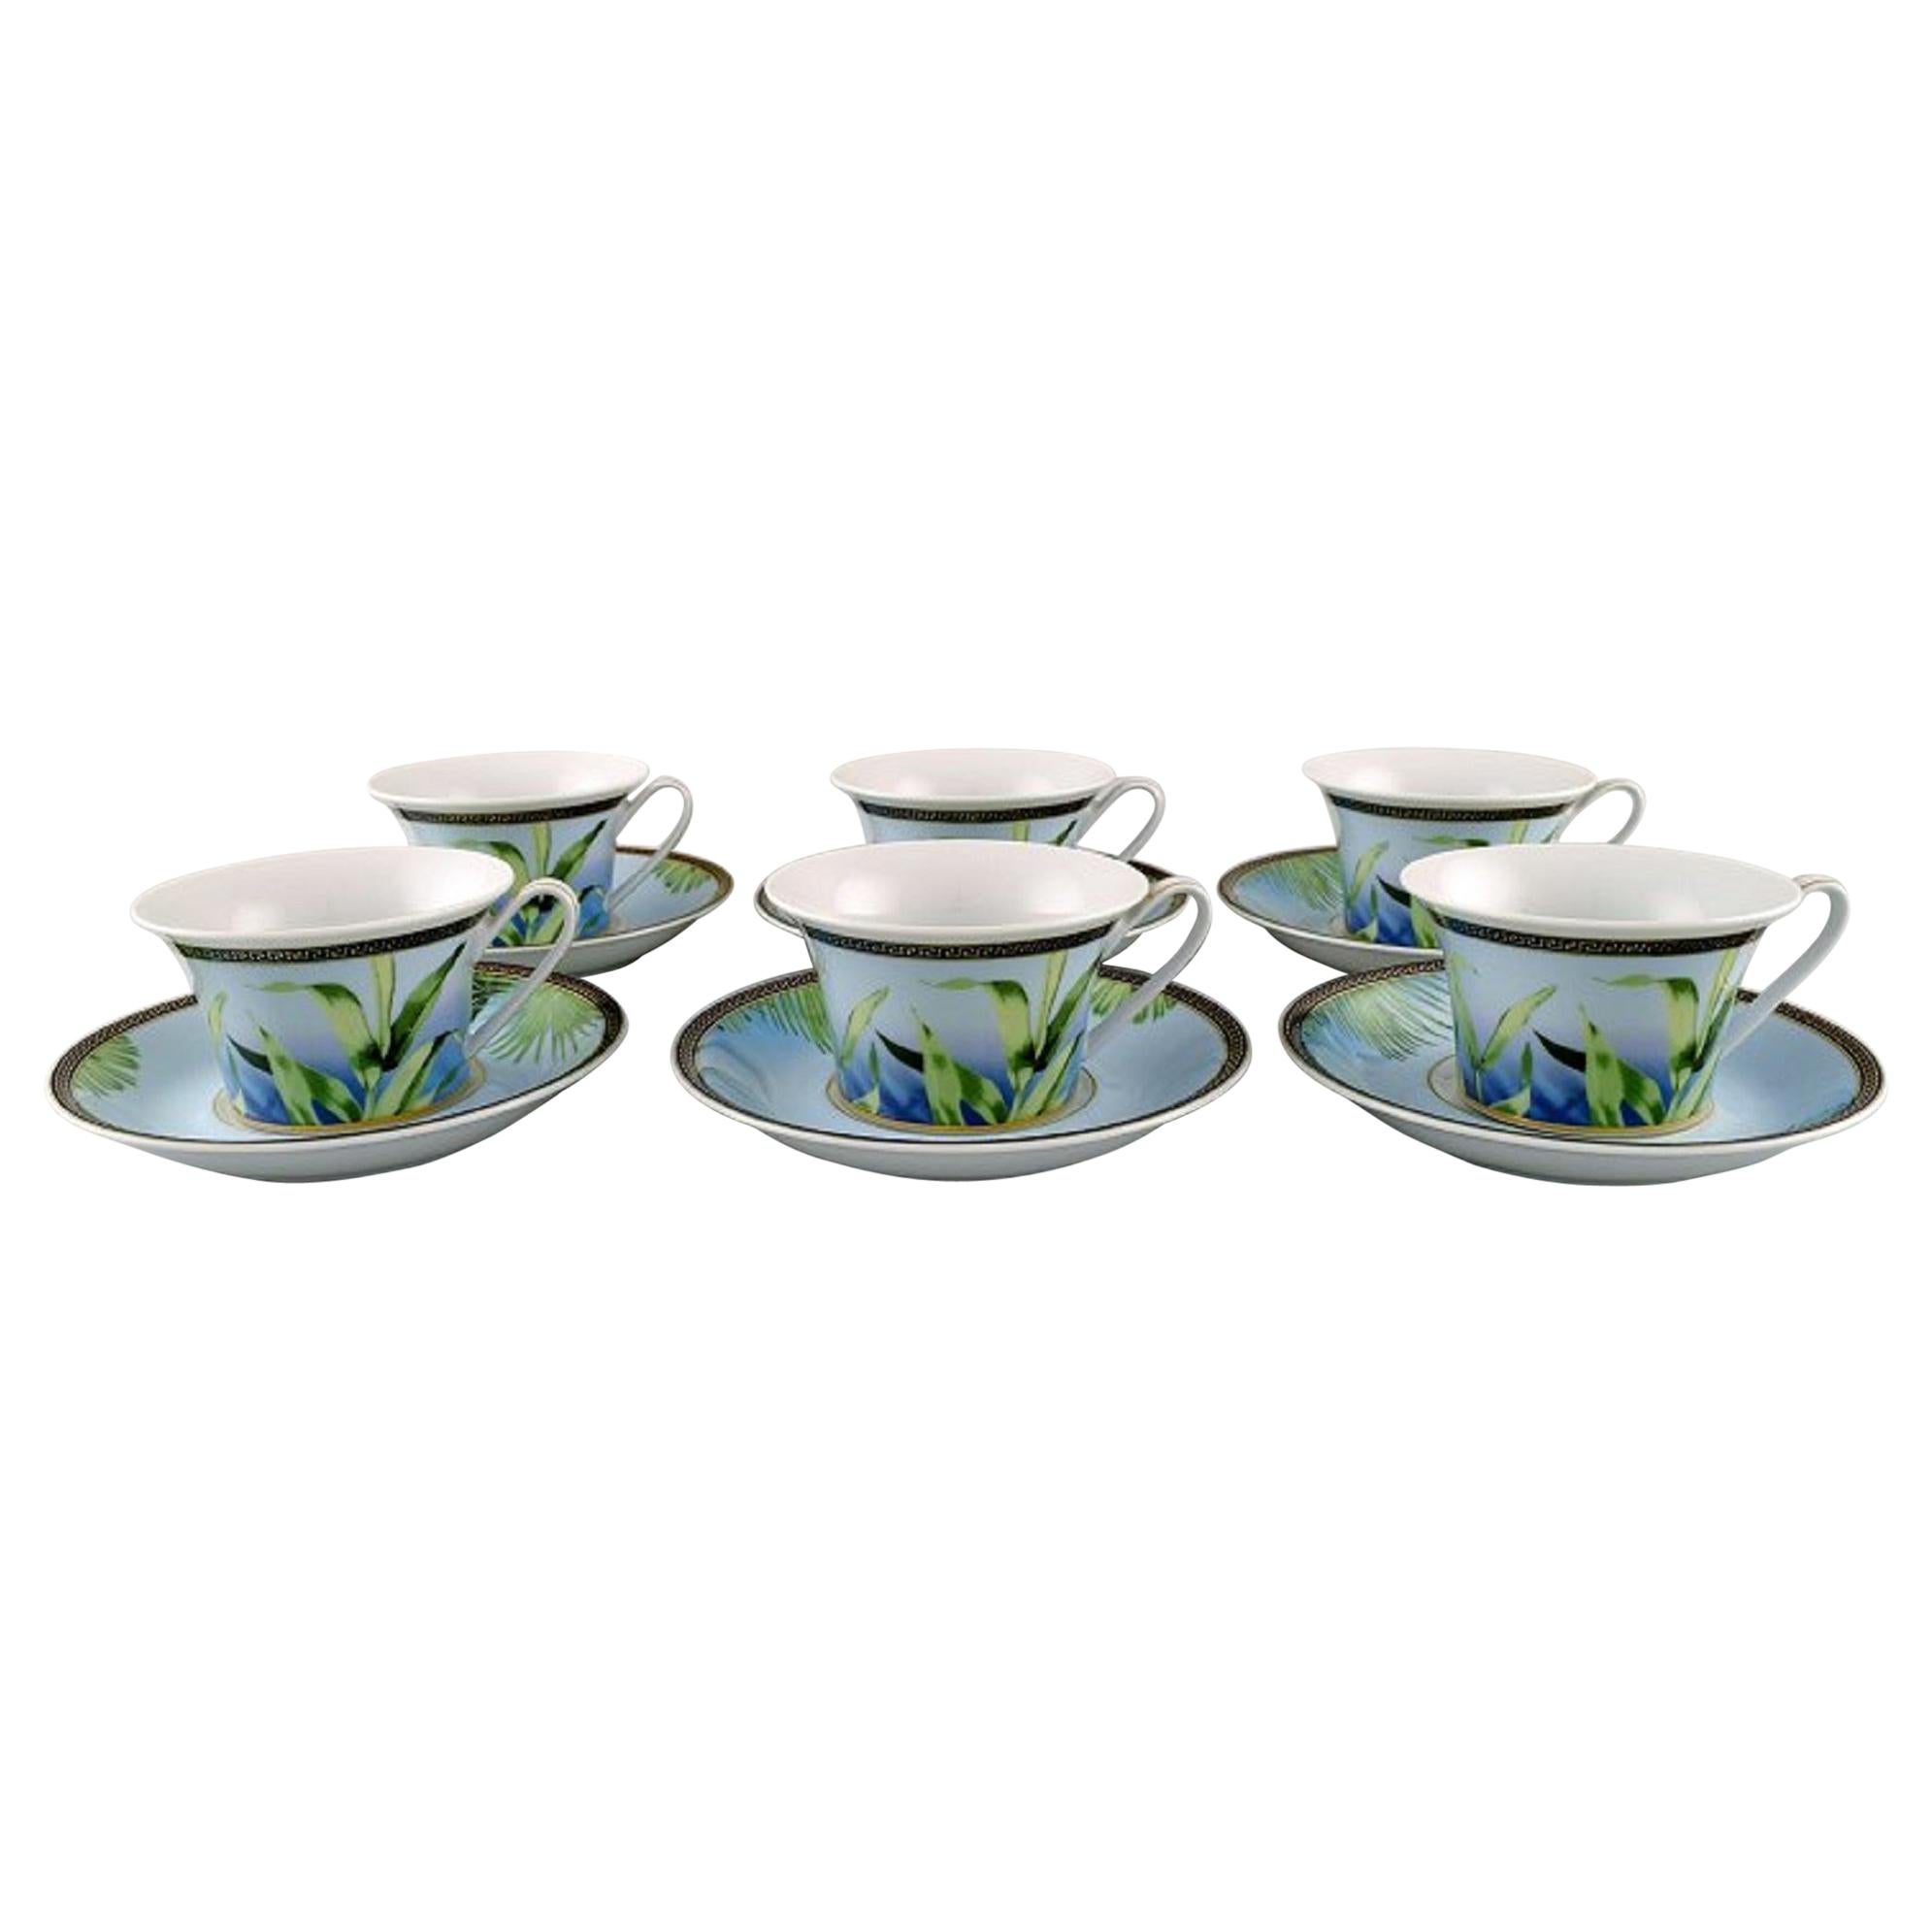 Gianni Versace for Rosenthal, Six Jungle Tea Cups with Saucer in Porcelain